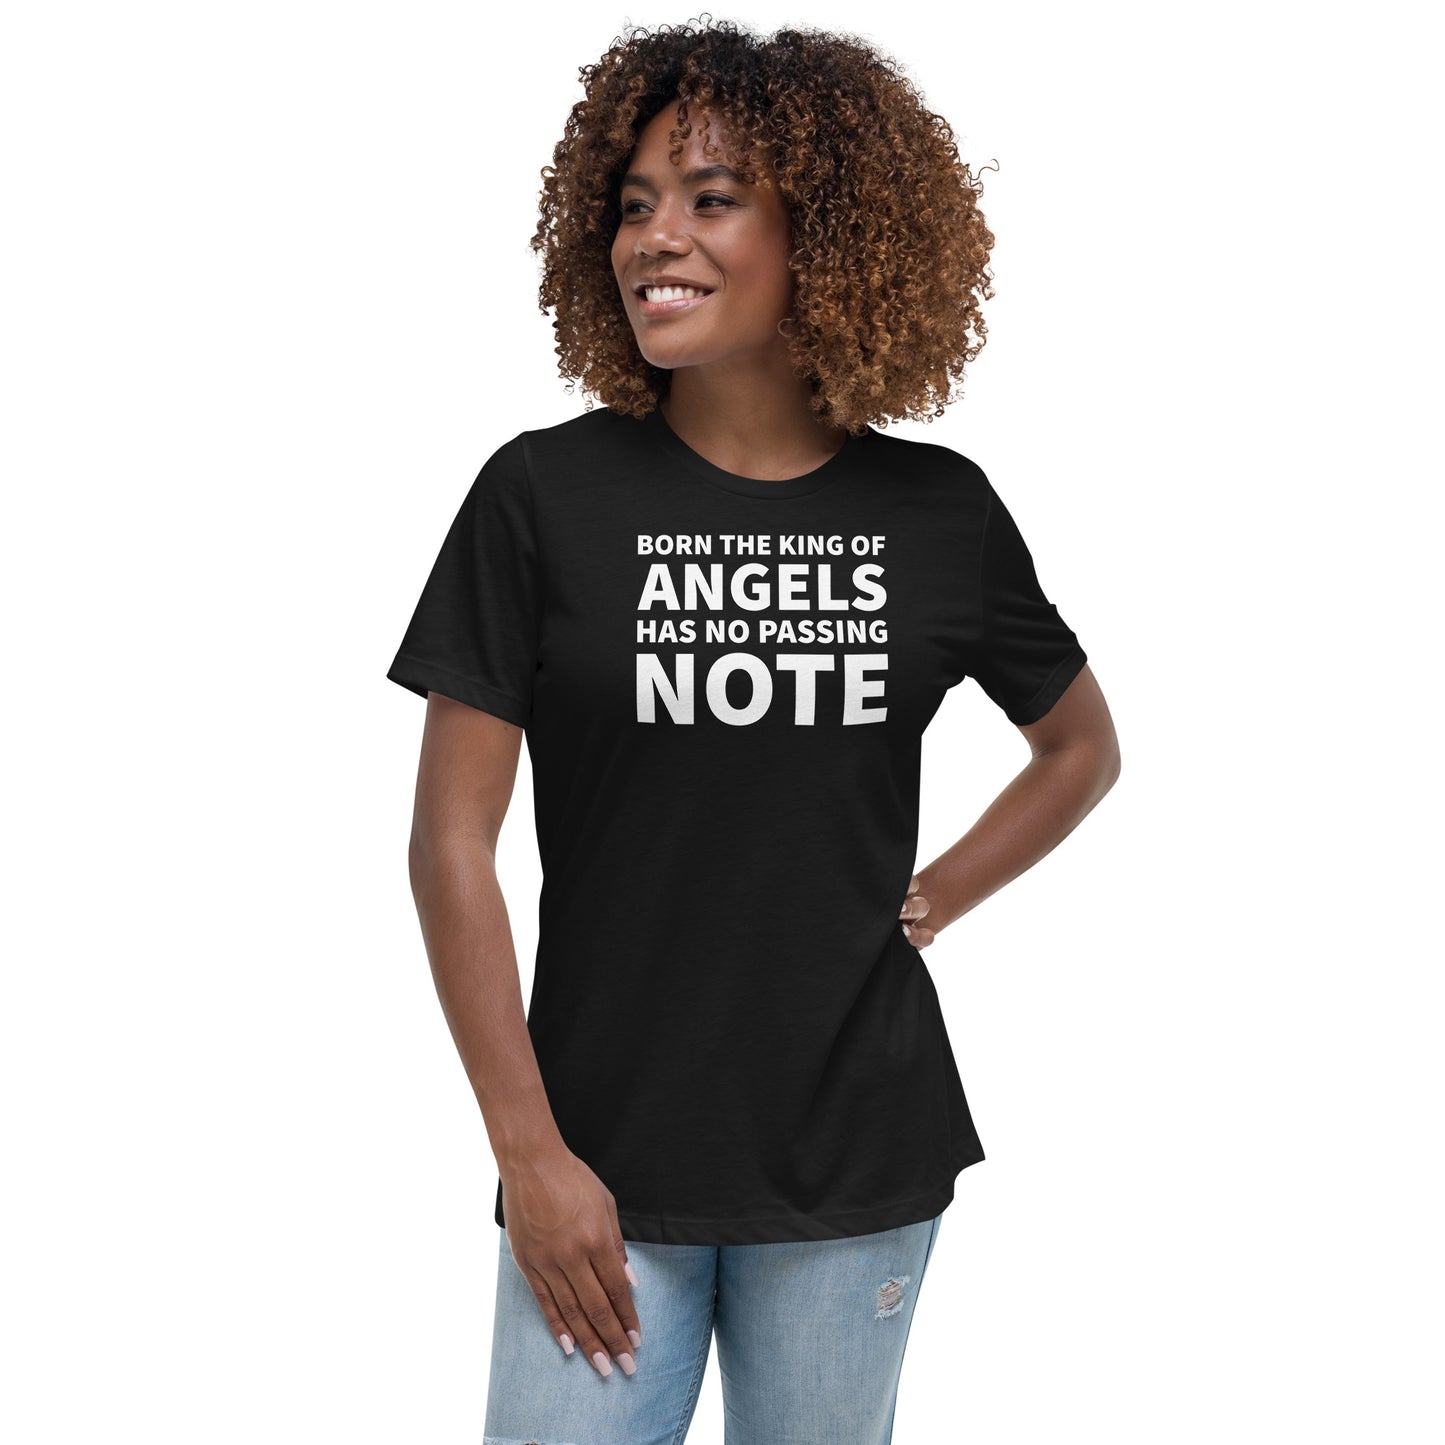 Passing Note - Christmas Women's Relaxed T-Shirt